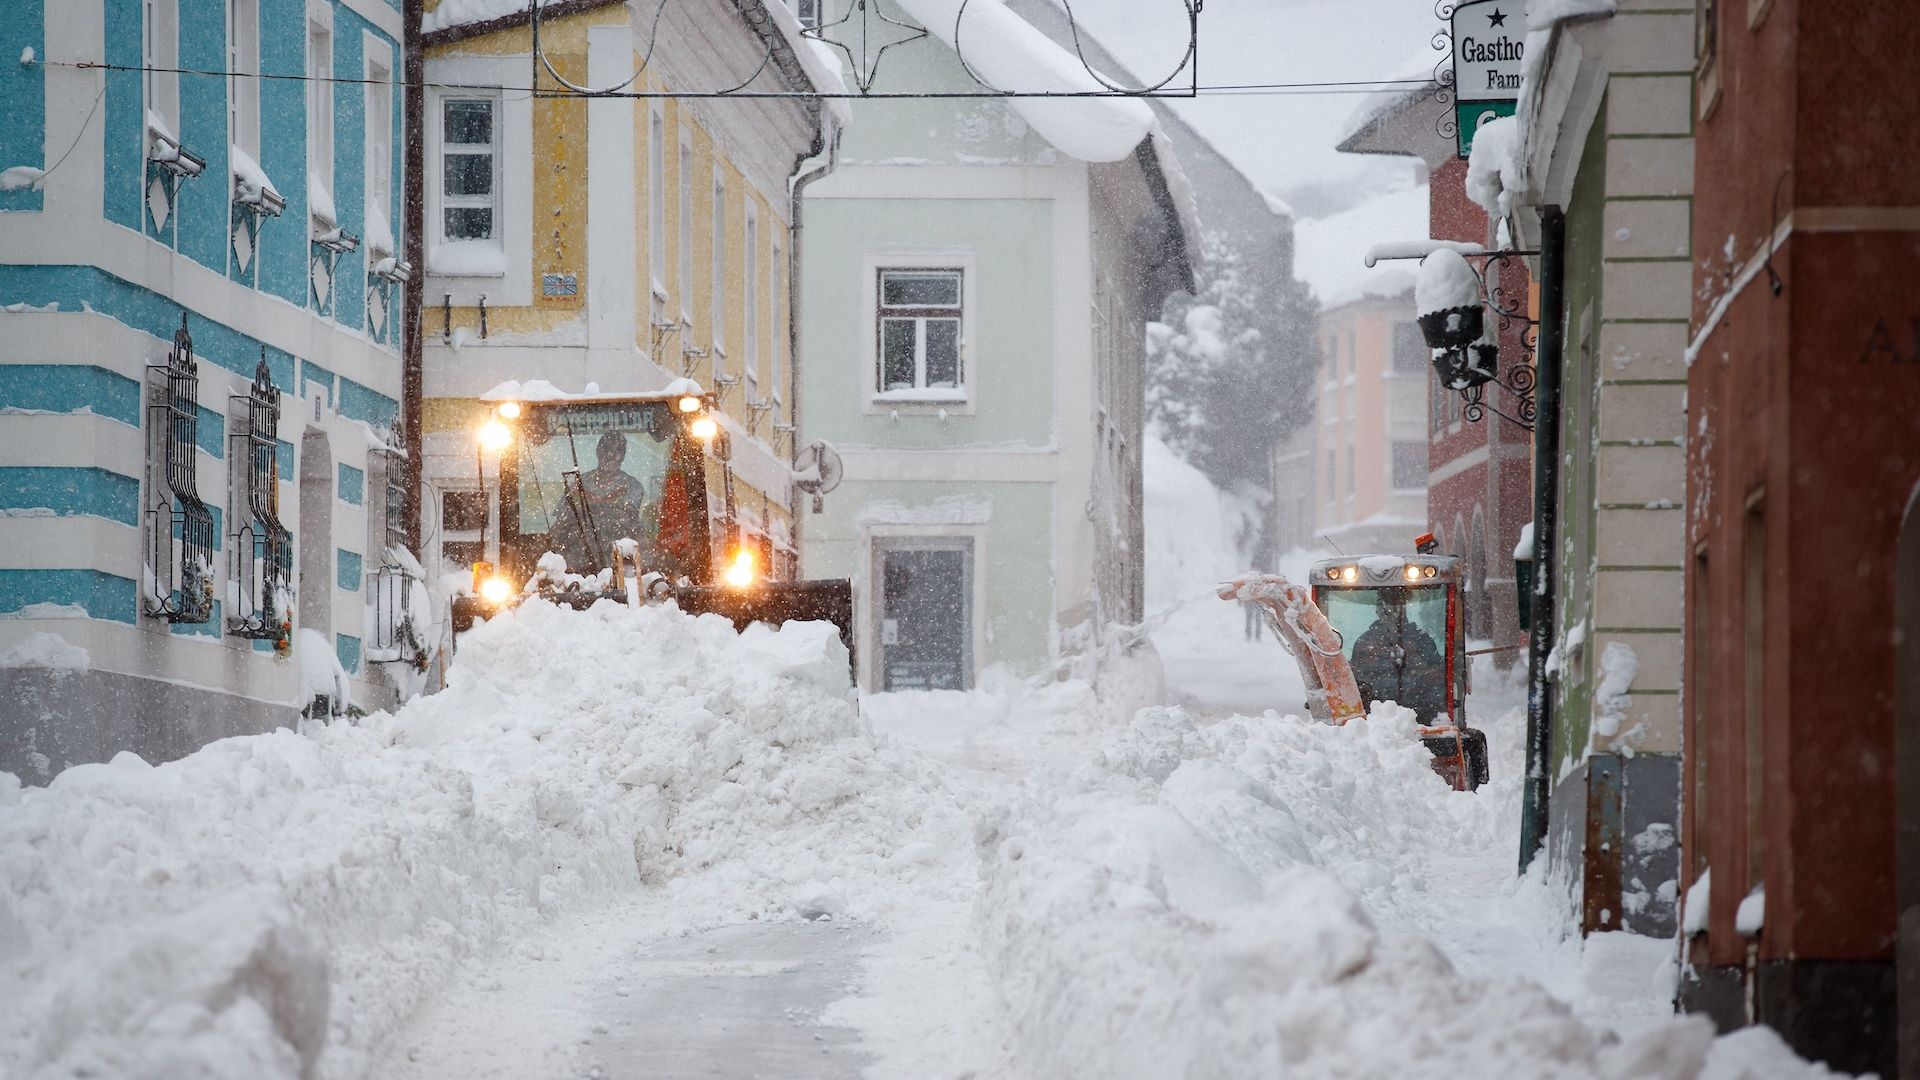 Photo of a lot of snow on a street in Austria.